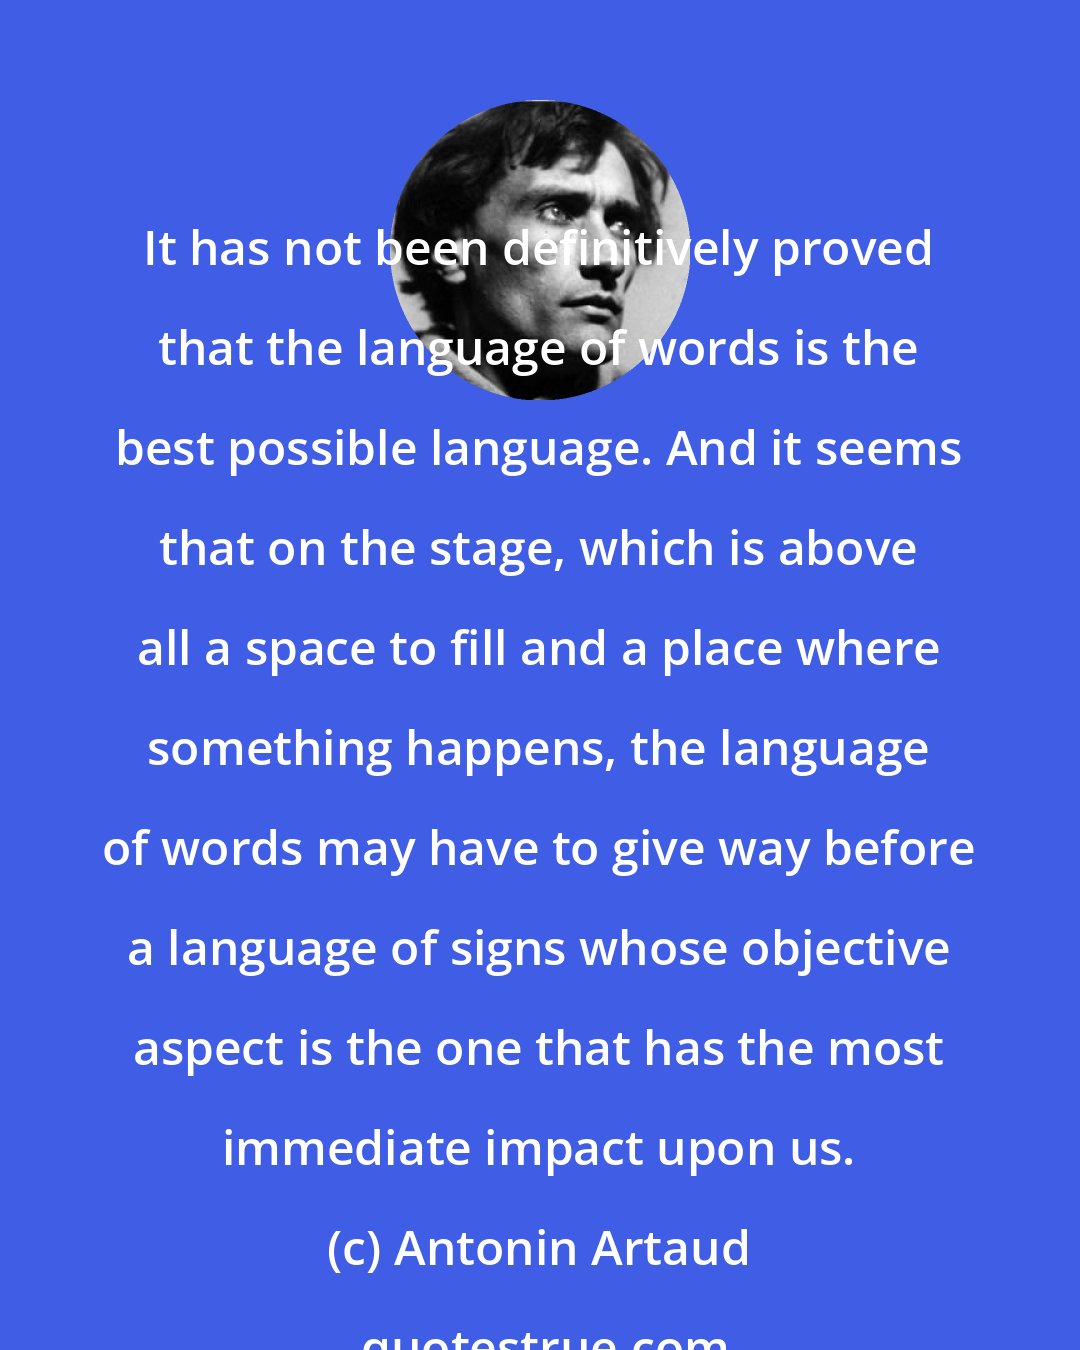 Antonin Artaud: It has not been definitively proved that the language of words is the best possible language. And it seems that on the stage, which is above all a space to fill and a place where something happens, the language of words may have to give way before a language of signs whose objective aspect is the one that has the most immediate impact upon us.